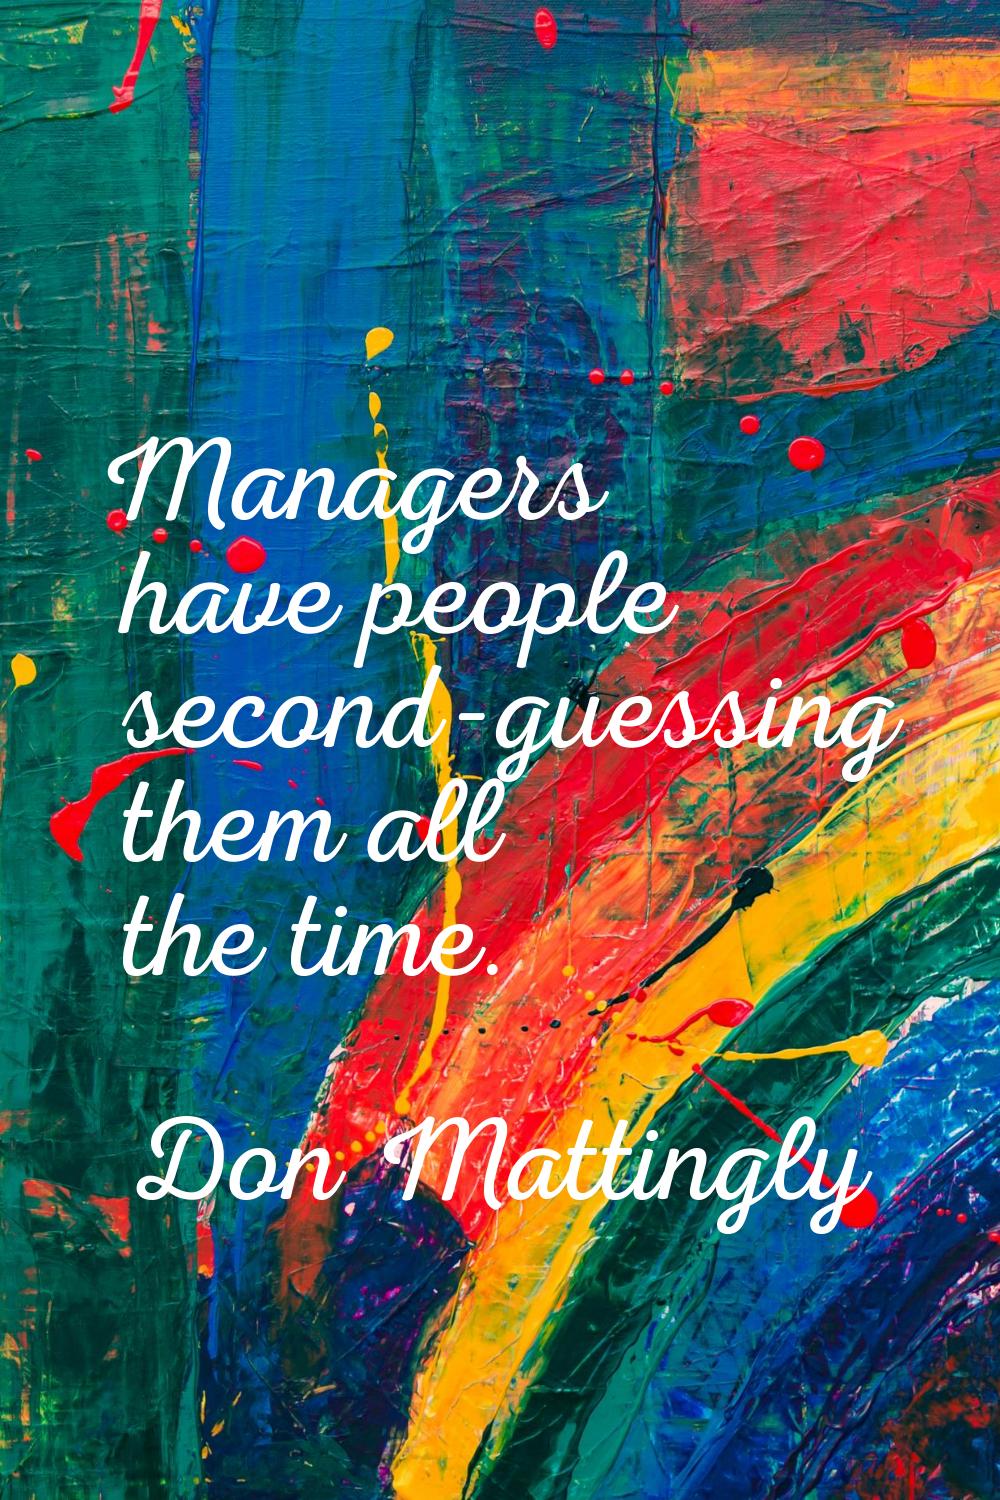 Managers have people second-guessing them all the time.